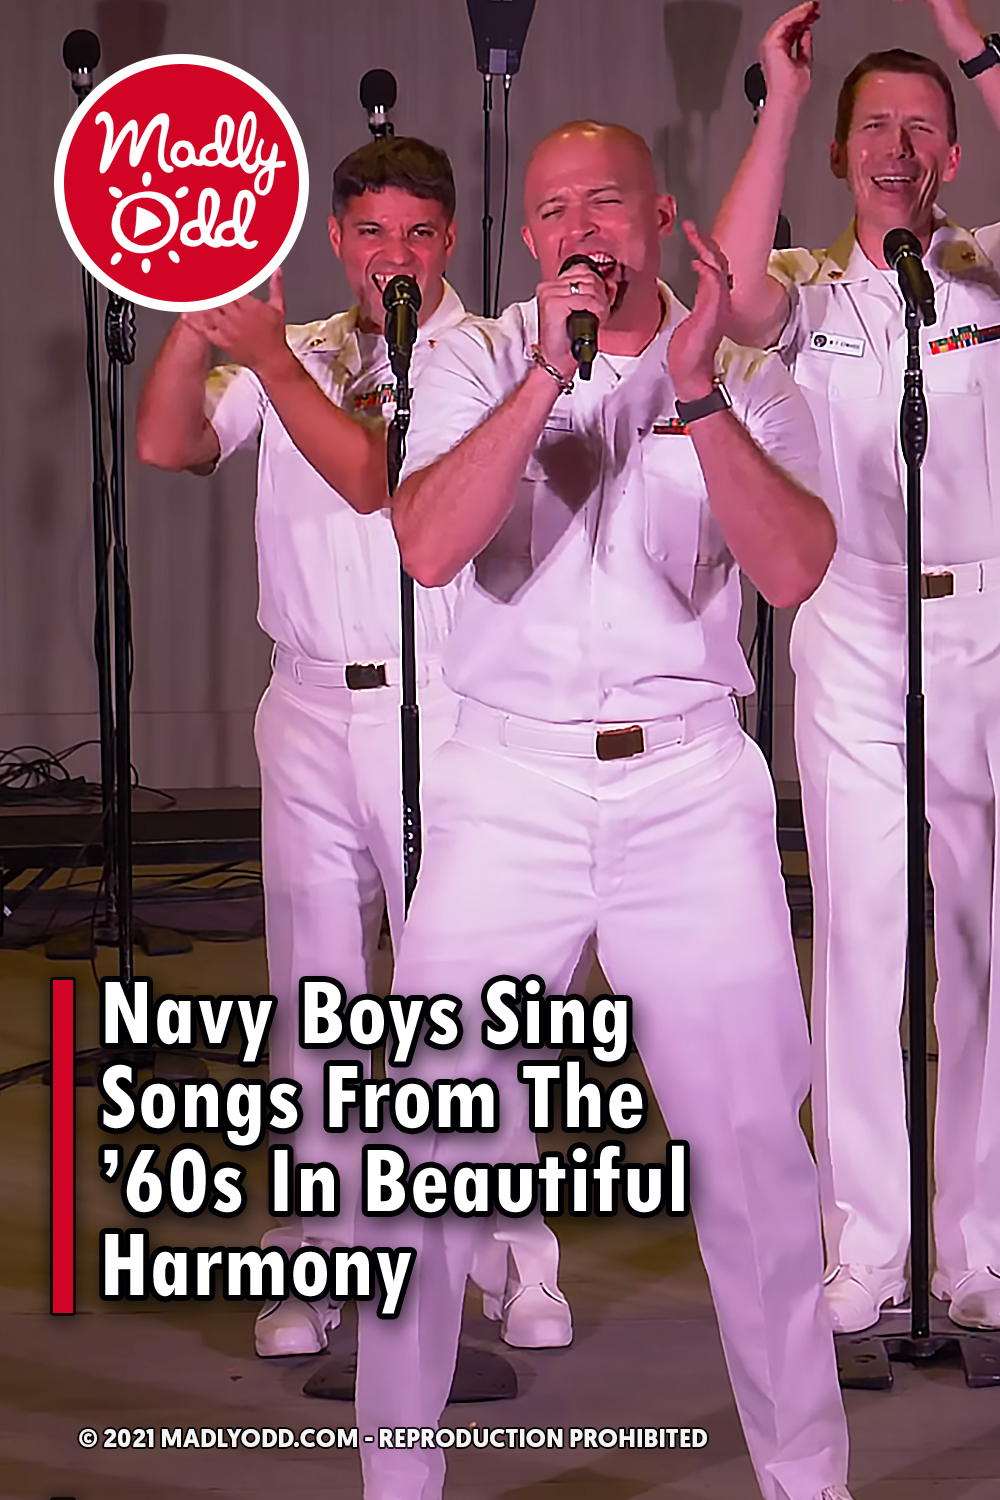 Navy Boys Sing Songs From The \'60s In Beautiful Harmony